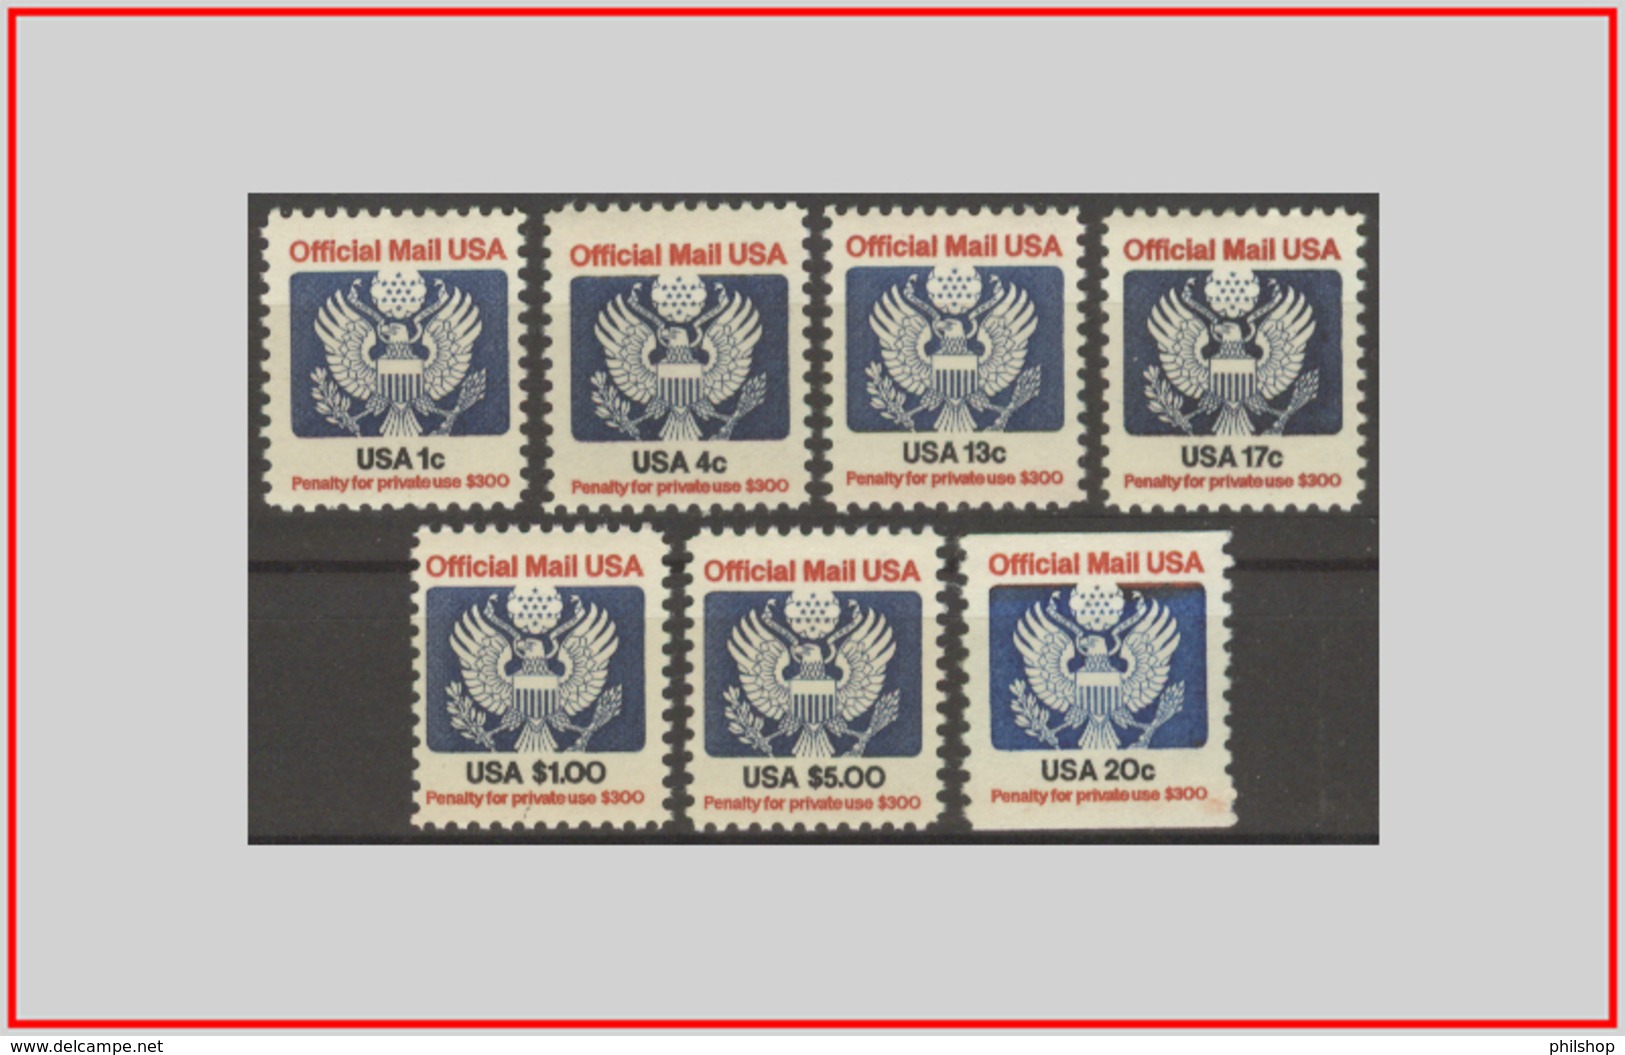 USA 1983 - Cat. SR 99/05 (MNH **/sg) Posta Ufficiale - Official Mail (1c. 4c. 13c. Senza Gomma) (010893) - Unused Stamps